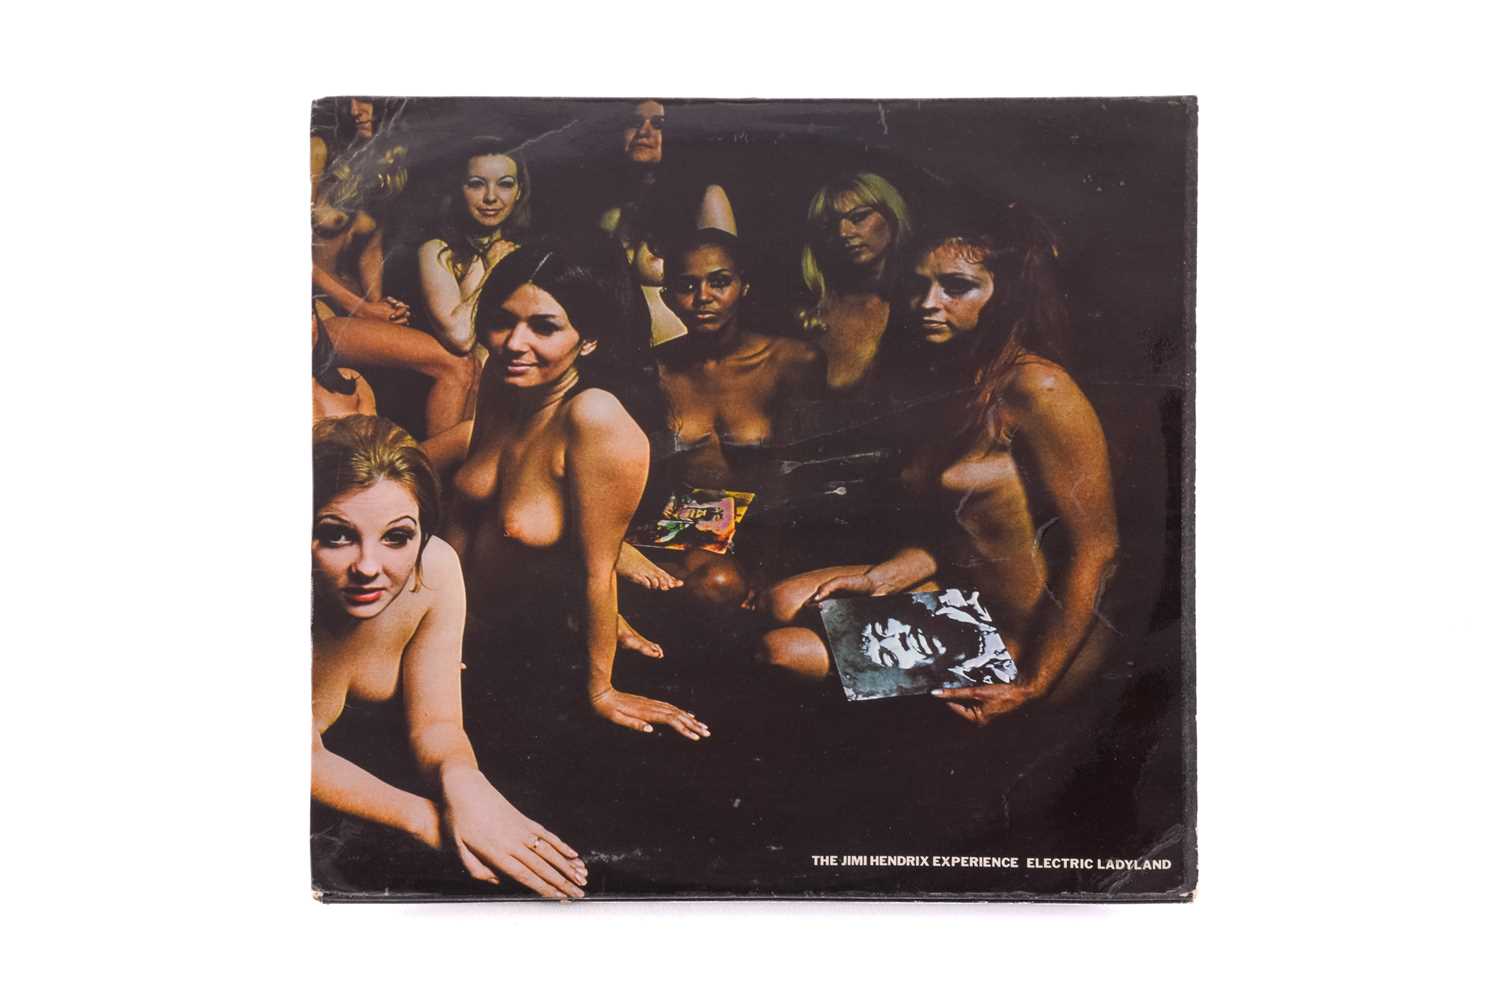 The Jimi Hendrix Experience: Electric Ladyland, a 1968 UK pressing having the serial number (